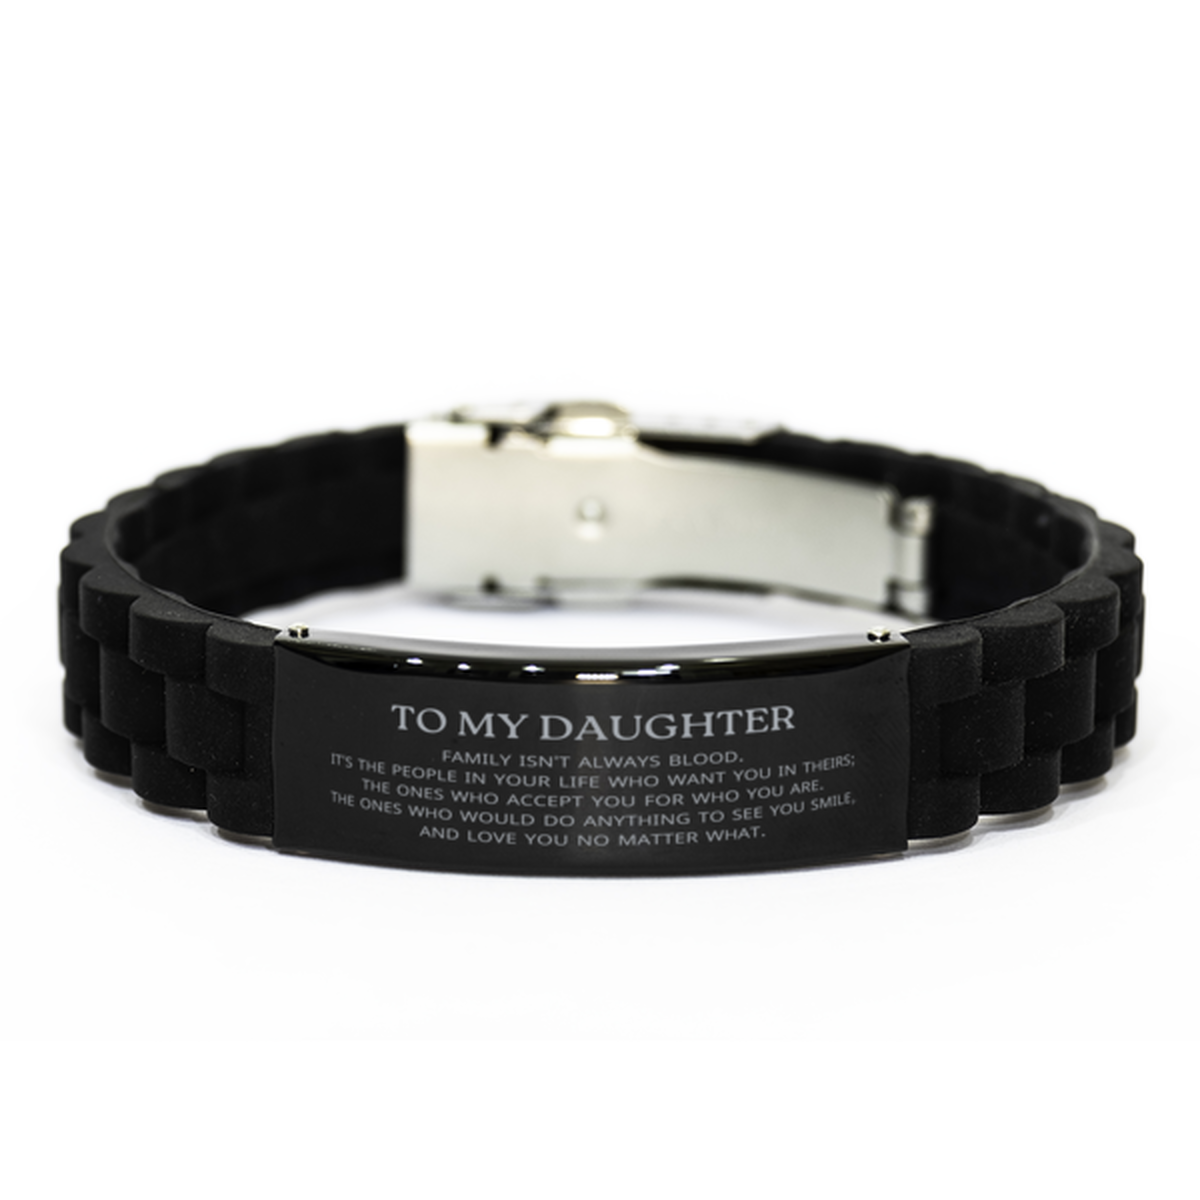 To My Daughter Gifts, Family isn't always blood, Daughter Black Glidelock Clasp Bracelet, Birthday Christmas Unique Present For Daughter